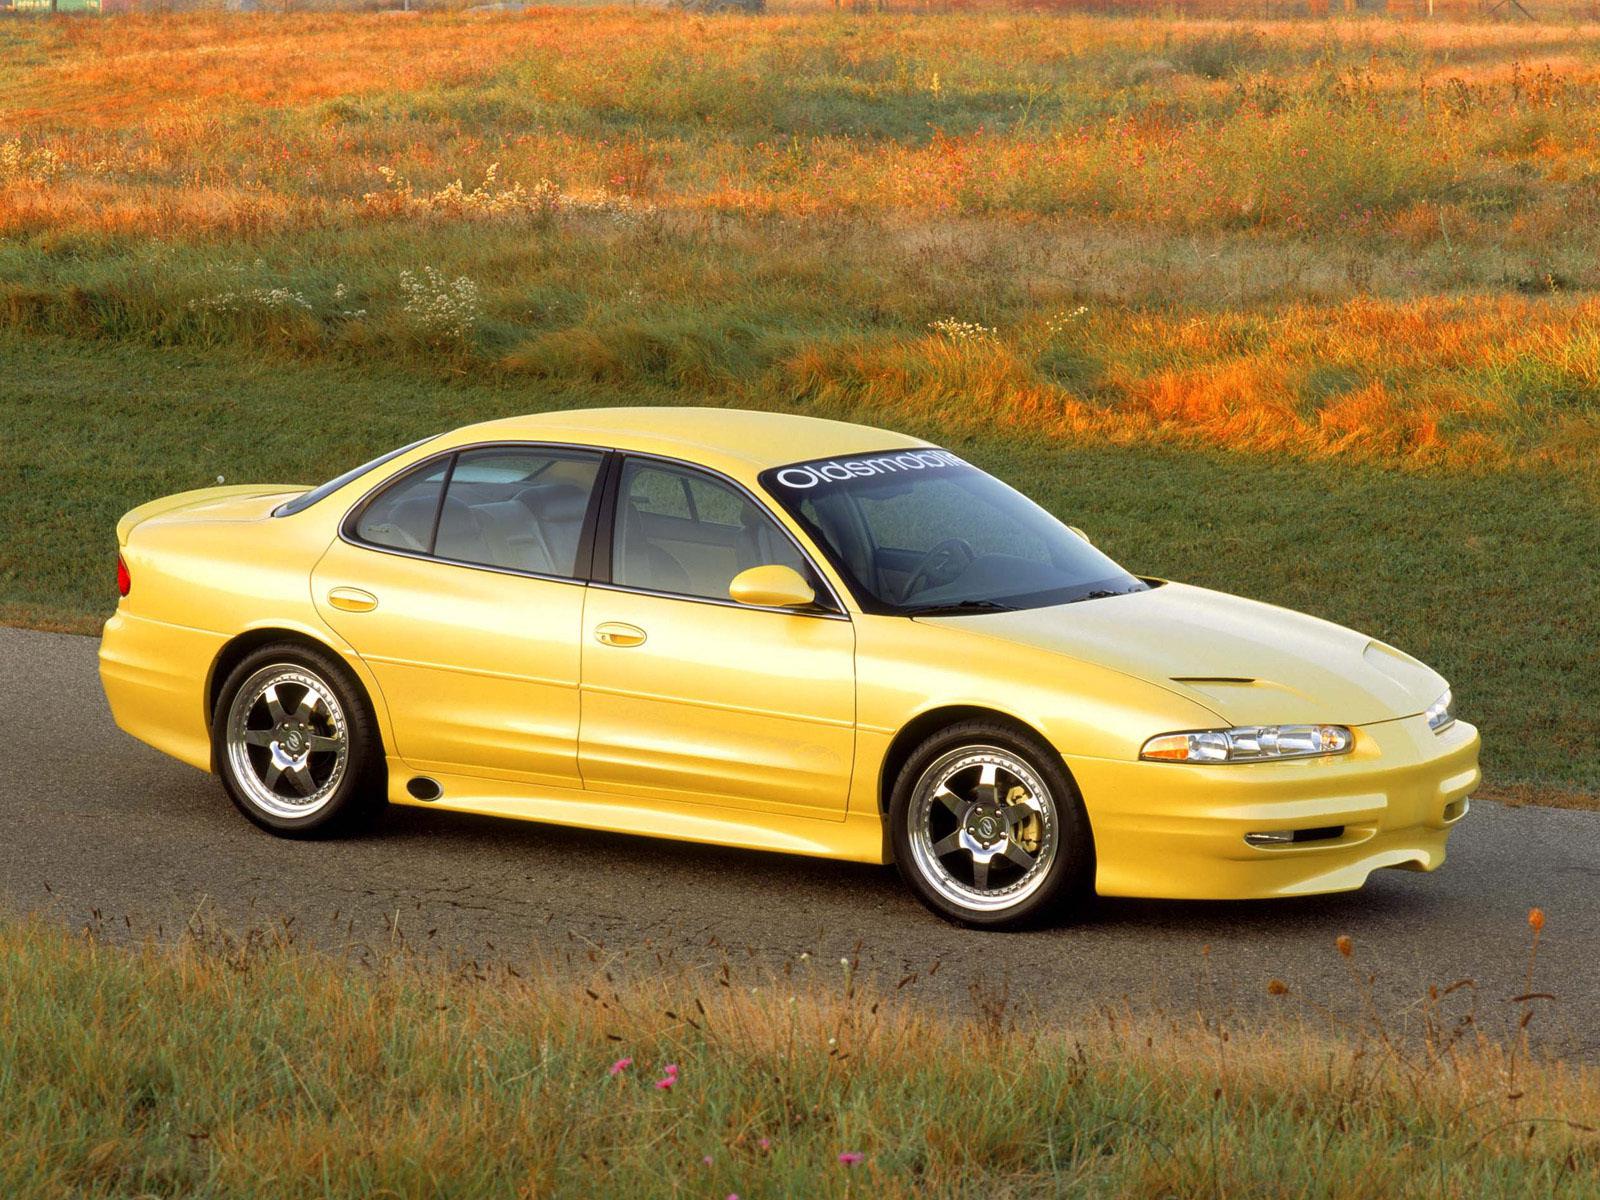 1999 Oldsmobile Cutlass, Official car of Nostalgia. People born after the  90s wanting blissful rose tinted goggles into a simpler time. And staring  right back is this. Wishing they got to see